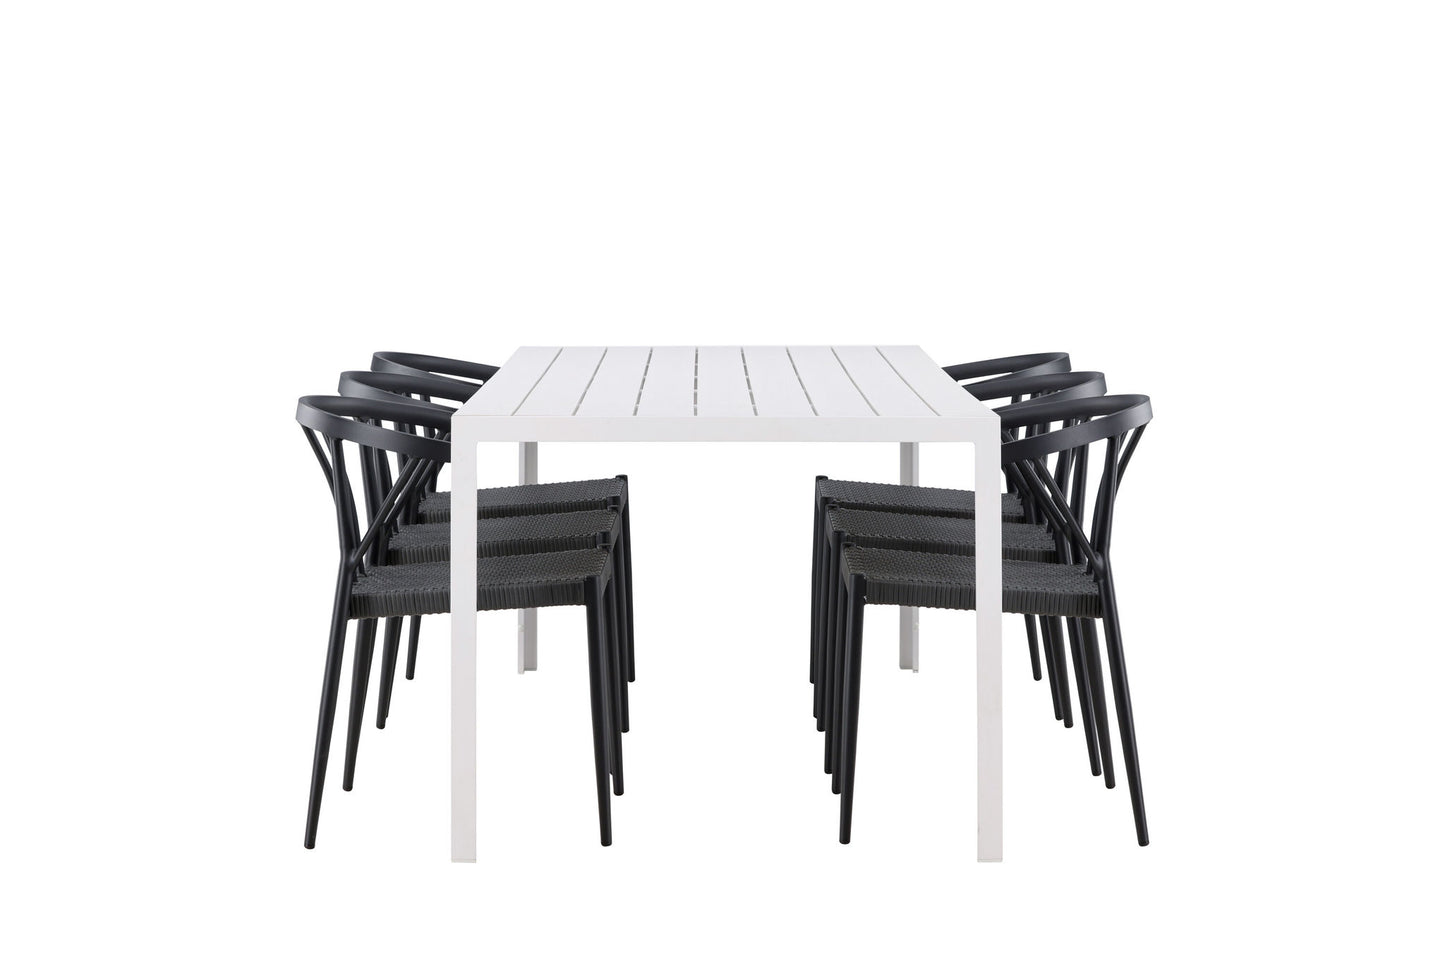 Havemøbler - Break Dining Table  - White / White Aintwood +Stina - Dining Chair- Black - Alu/wicker - NEED Higher Seat hegiht! _6